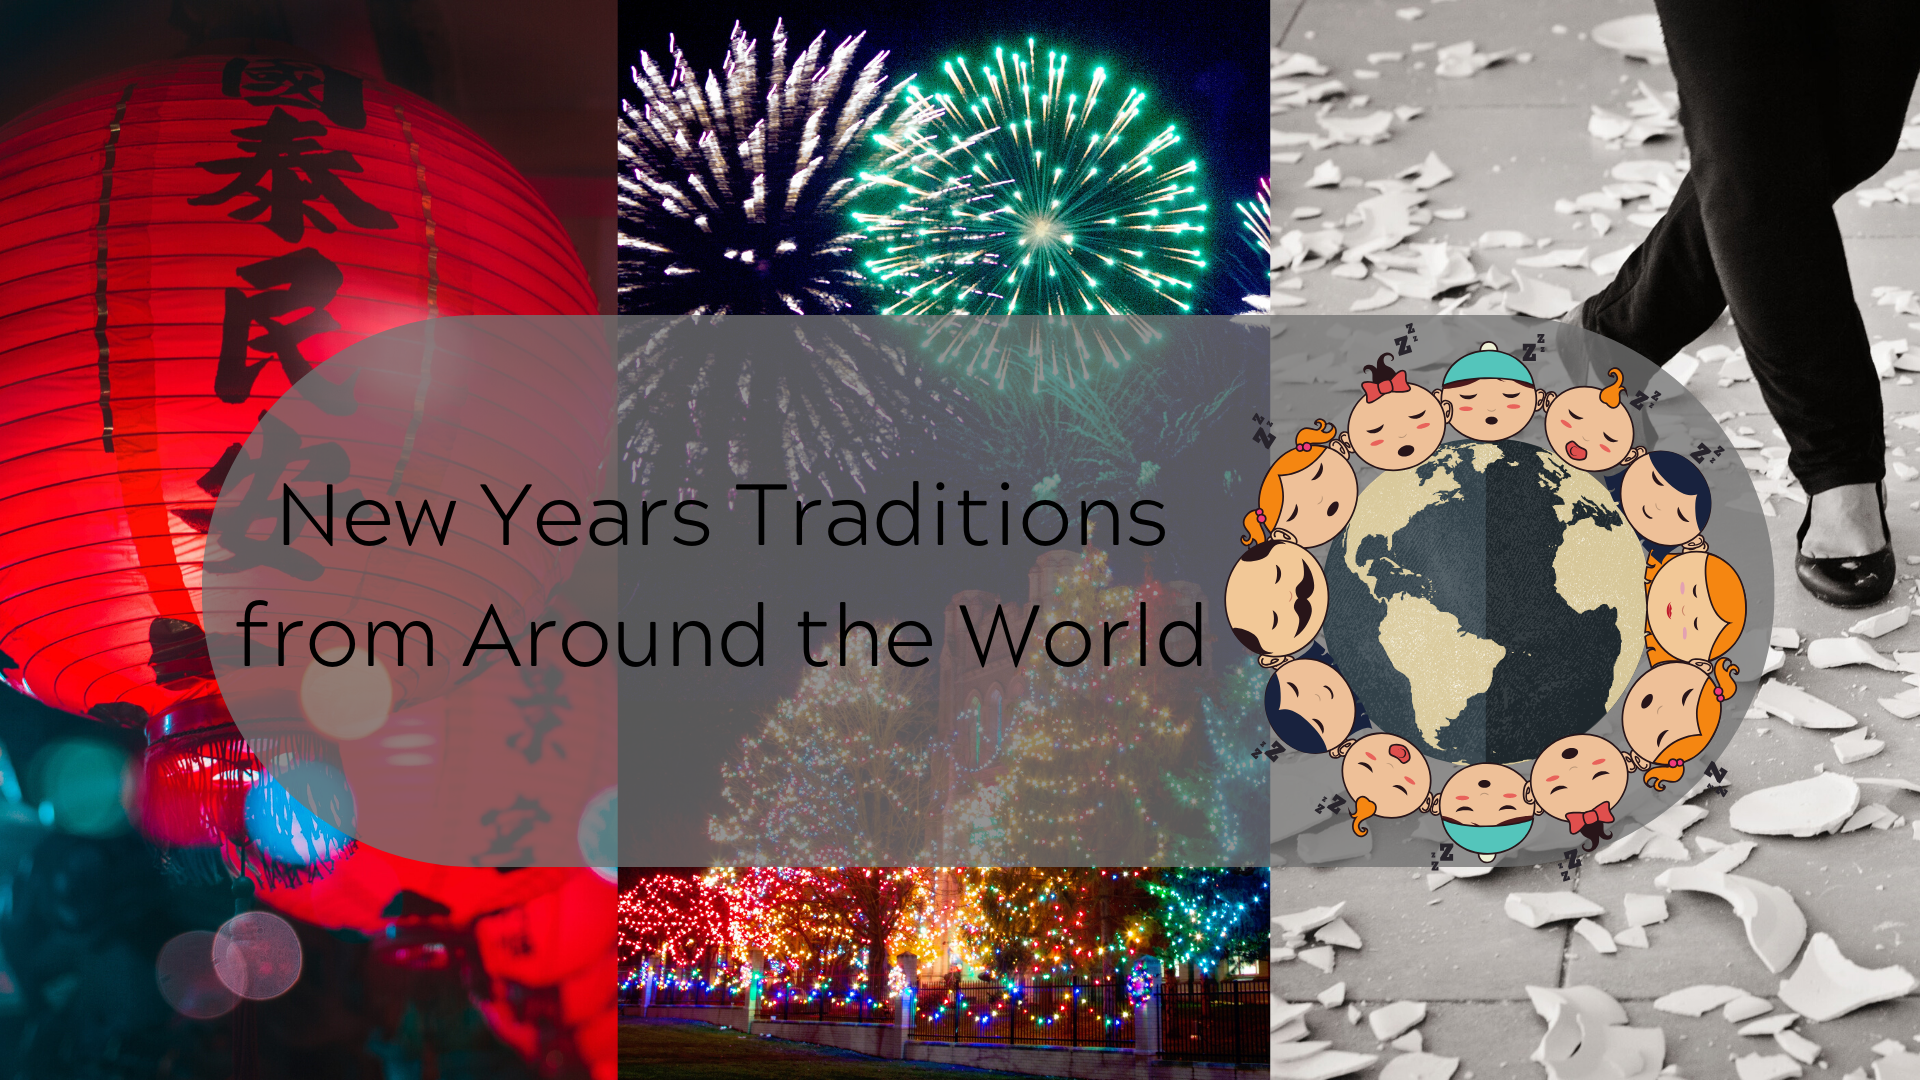 New Years Traditions from Around the World